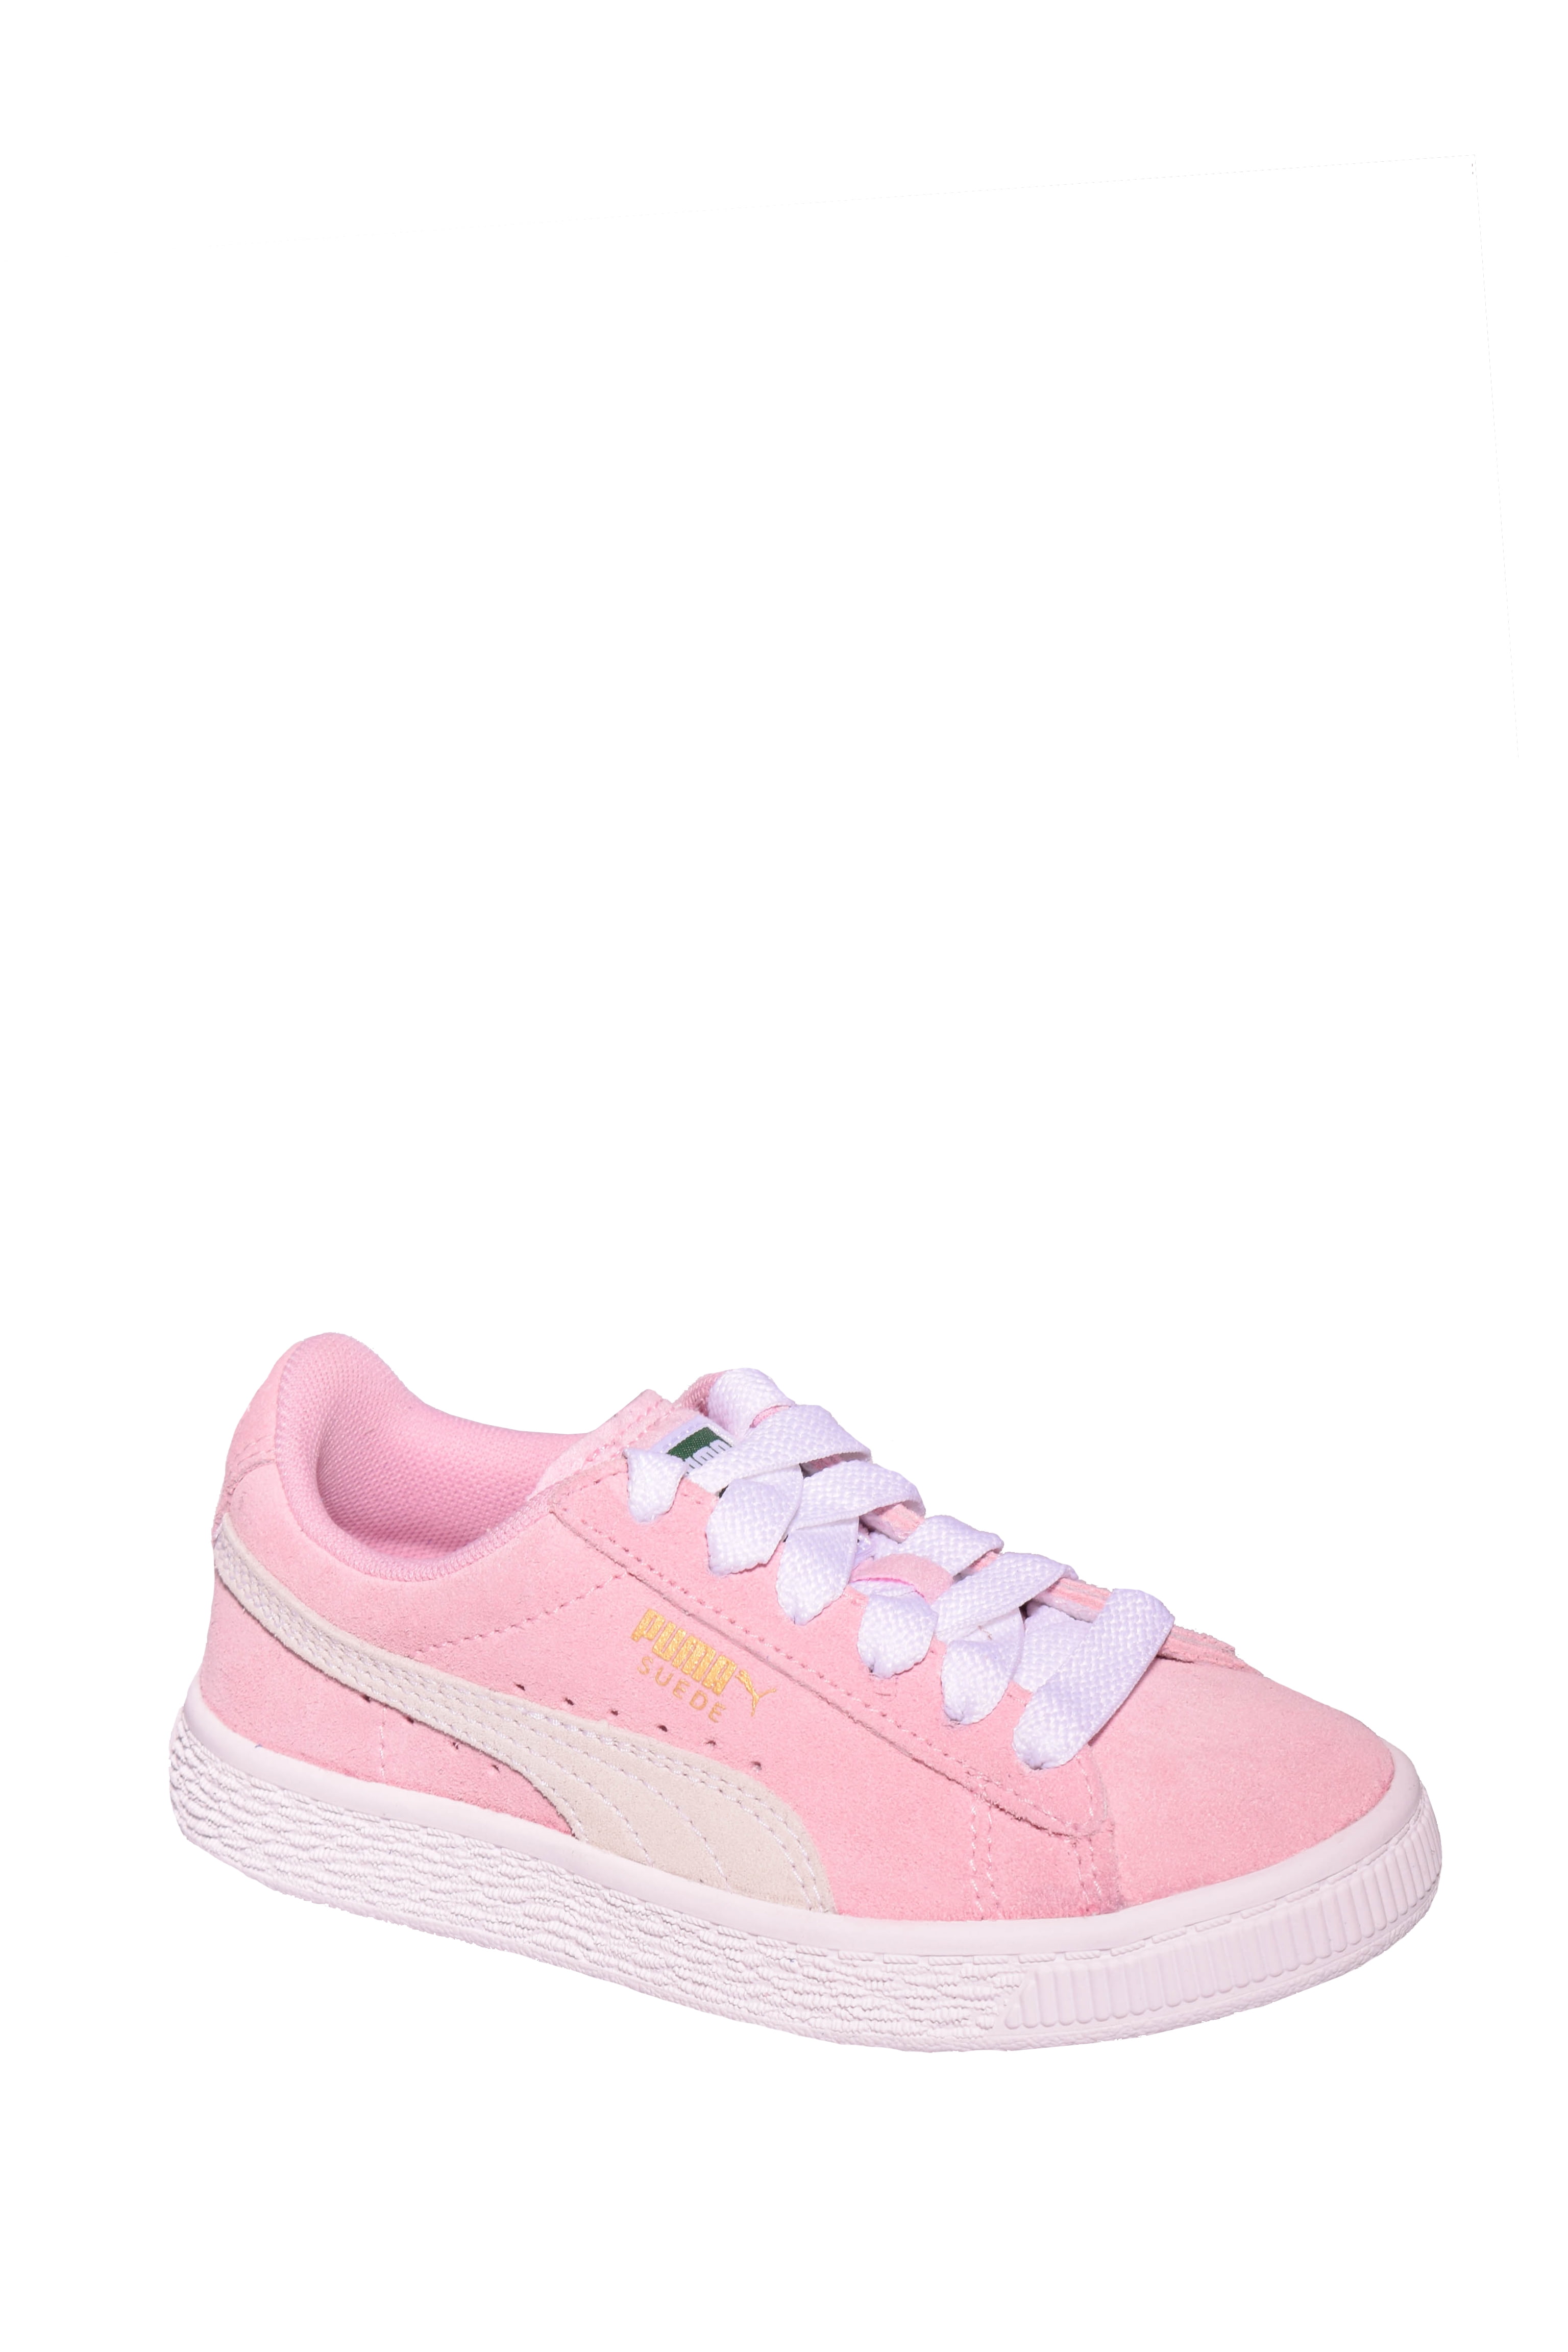 Classic Puma Suede pink sneakers.  Chaussure puma homme, Chaussures de  sport puma, Sneakers